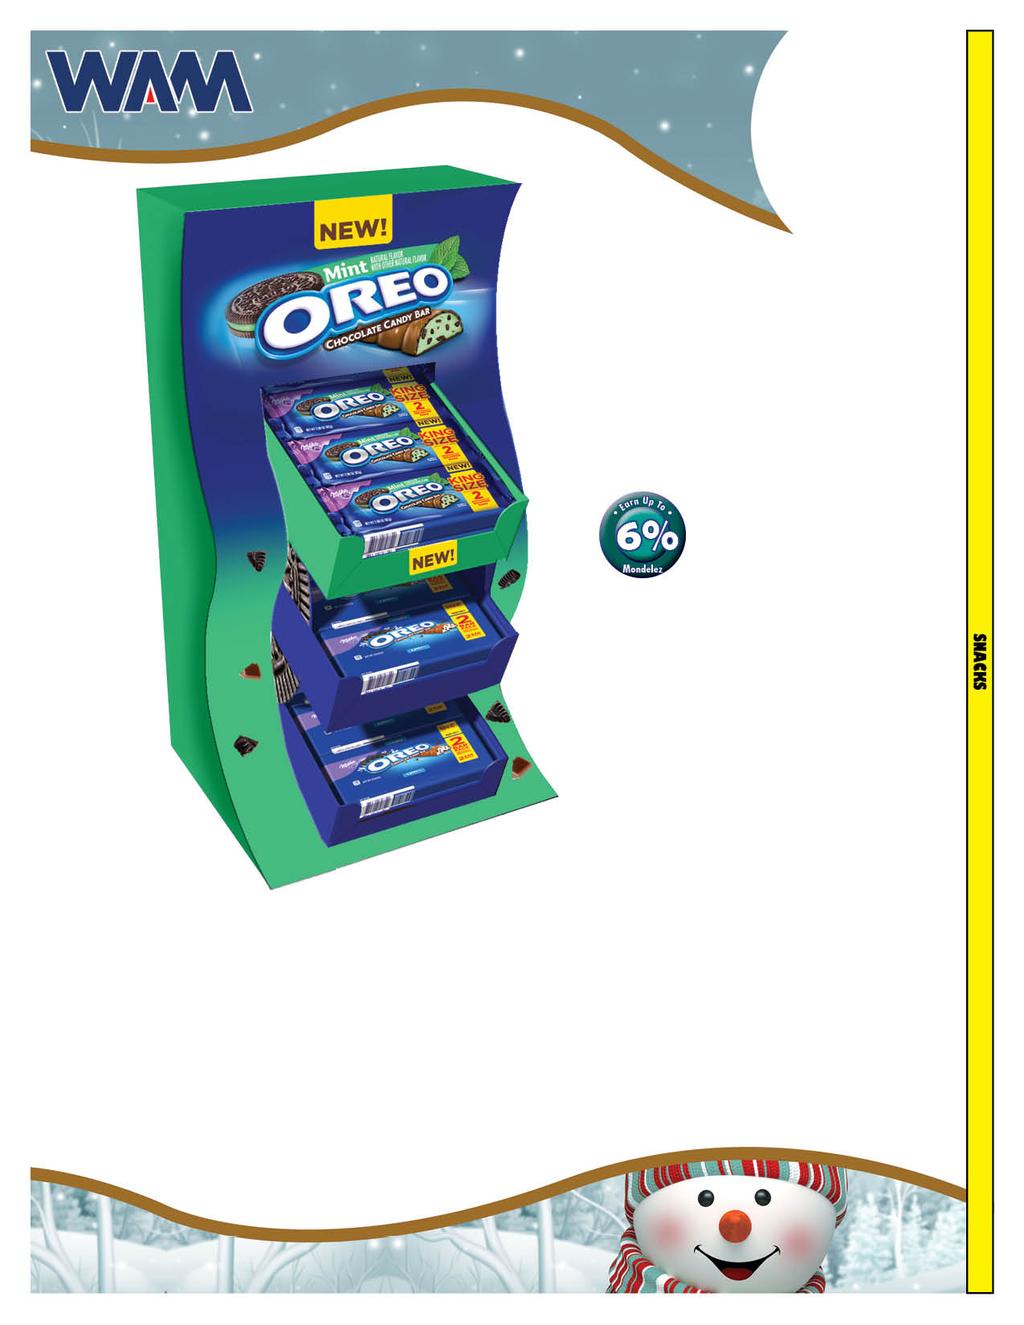 42.2% Item # Ct. Description Cost Delivery Date: 12/3/17 Milka/Oreo King Size 2.